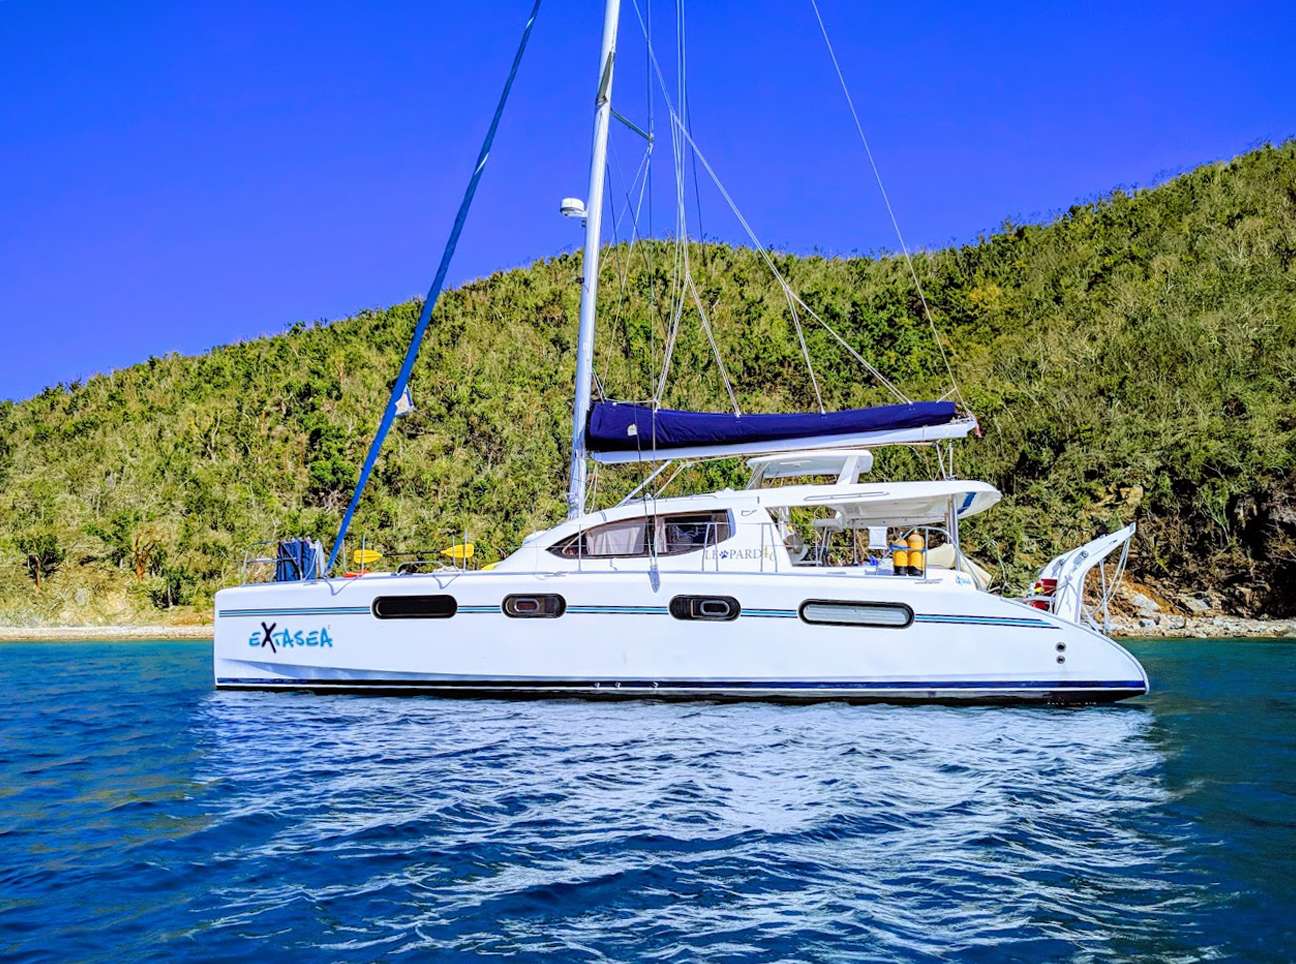 Welcome to EXTASEA 2 BVI Yacht Charters
EXTASEA 2 operates their BVI yacht charters out of Tortola.
Beautiful Boat -  Looking for an exotic getaway in Paradise?  Let Mike and Lesley welcome you to EXTASEA 2, a luxury Owner-Operated Leopard 46 Catamaran, which was voted Cruising Boat of the Year.
Relaxing Atmosphere  - Enjoy your dream vacation in our Feel-at-Home friendly atmosphere, enjoying tropical drinks and fabulous food while you discover idyllic bays, white beaches, and beautiful islands.
Endless Activities -  Snorkel in crystalline waters, SCUBA dive tropical reefs and famous shipwrecks, or partake in the various water-sport thrills, or simply relax and get a tan while your personal chef and skipper spoil and pamper you.
Flexible Itininary  - A BVI itinerary is extremely flexible and the cruising grounds present a myraid of opportunities. Let us show you a good time in the islands. There's an array of exciting things to do within the islands,and a range of fabulous Caribbean beaches to enjoy, each with its own special character and vibe. Together with your skippers advice, we will plan a holiday of a lifetime according to where your wishes and the weather takes you.